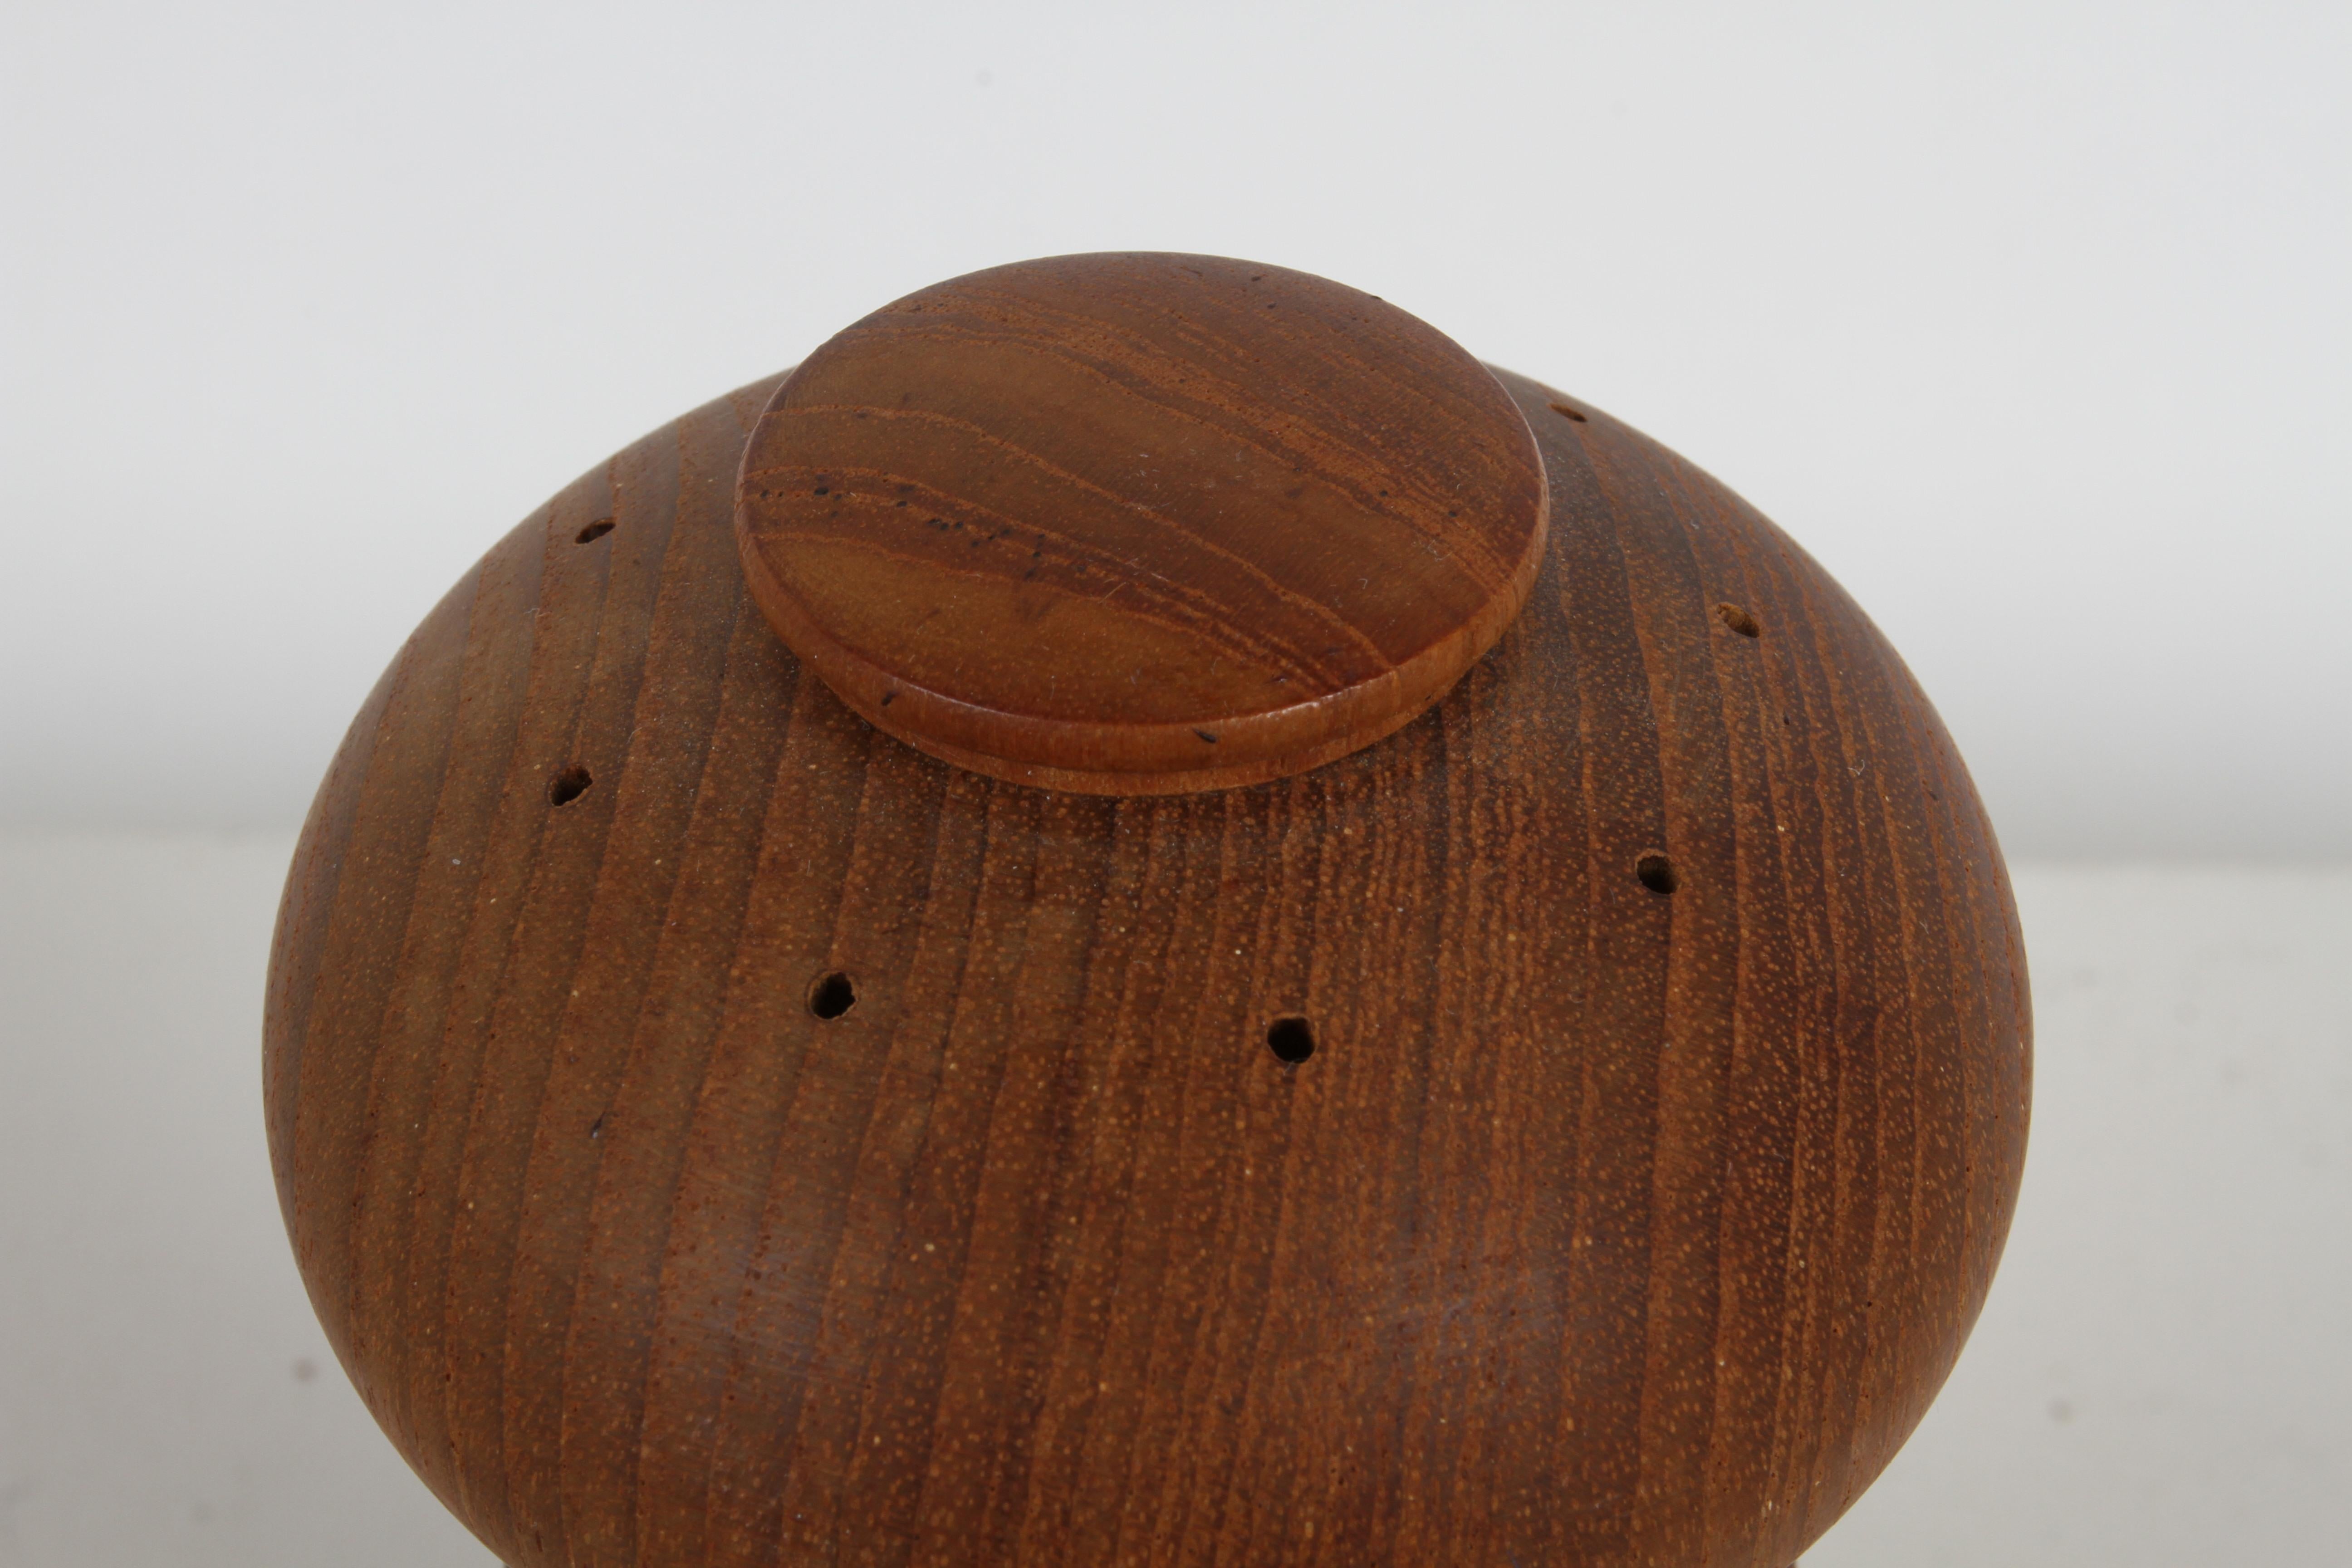 1970s Danish Modern Jens Quistgaard Teak Peppermill with Salt by Dansk In Good Condition For Sale In St. Louis, MO